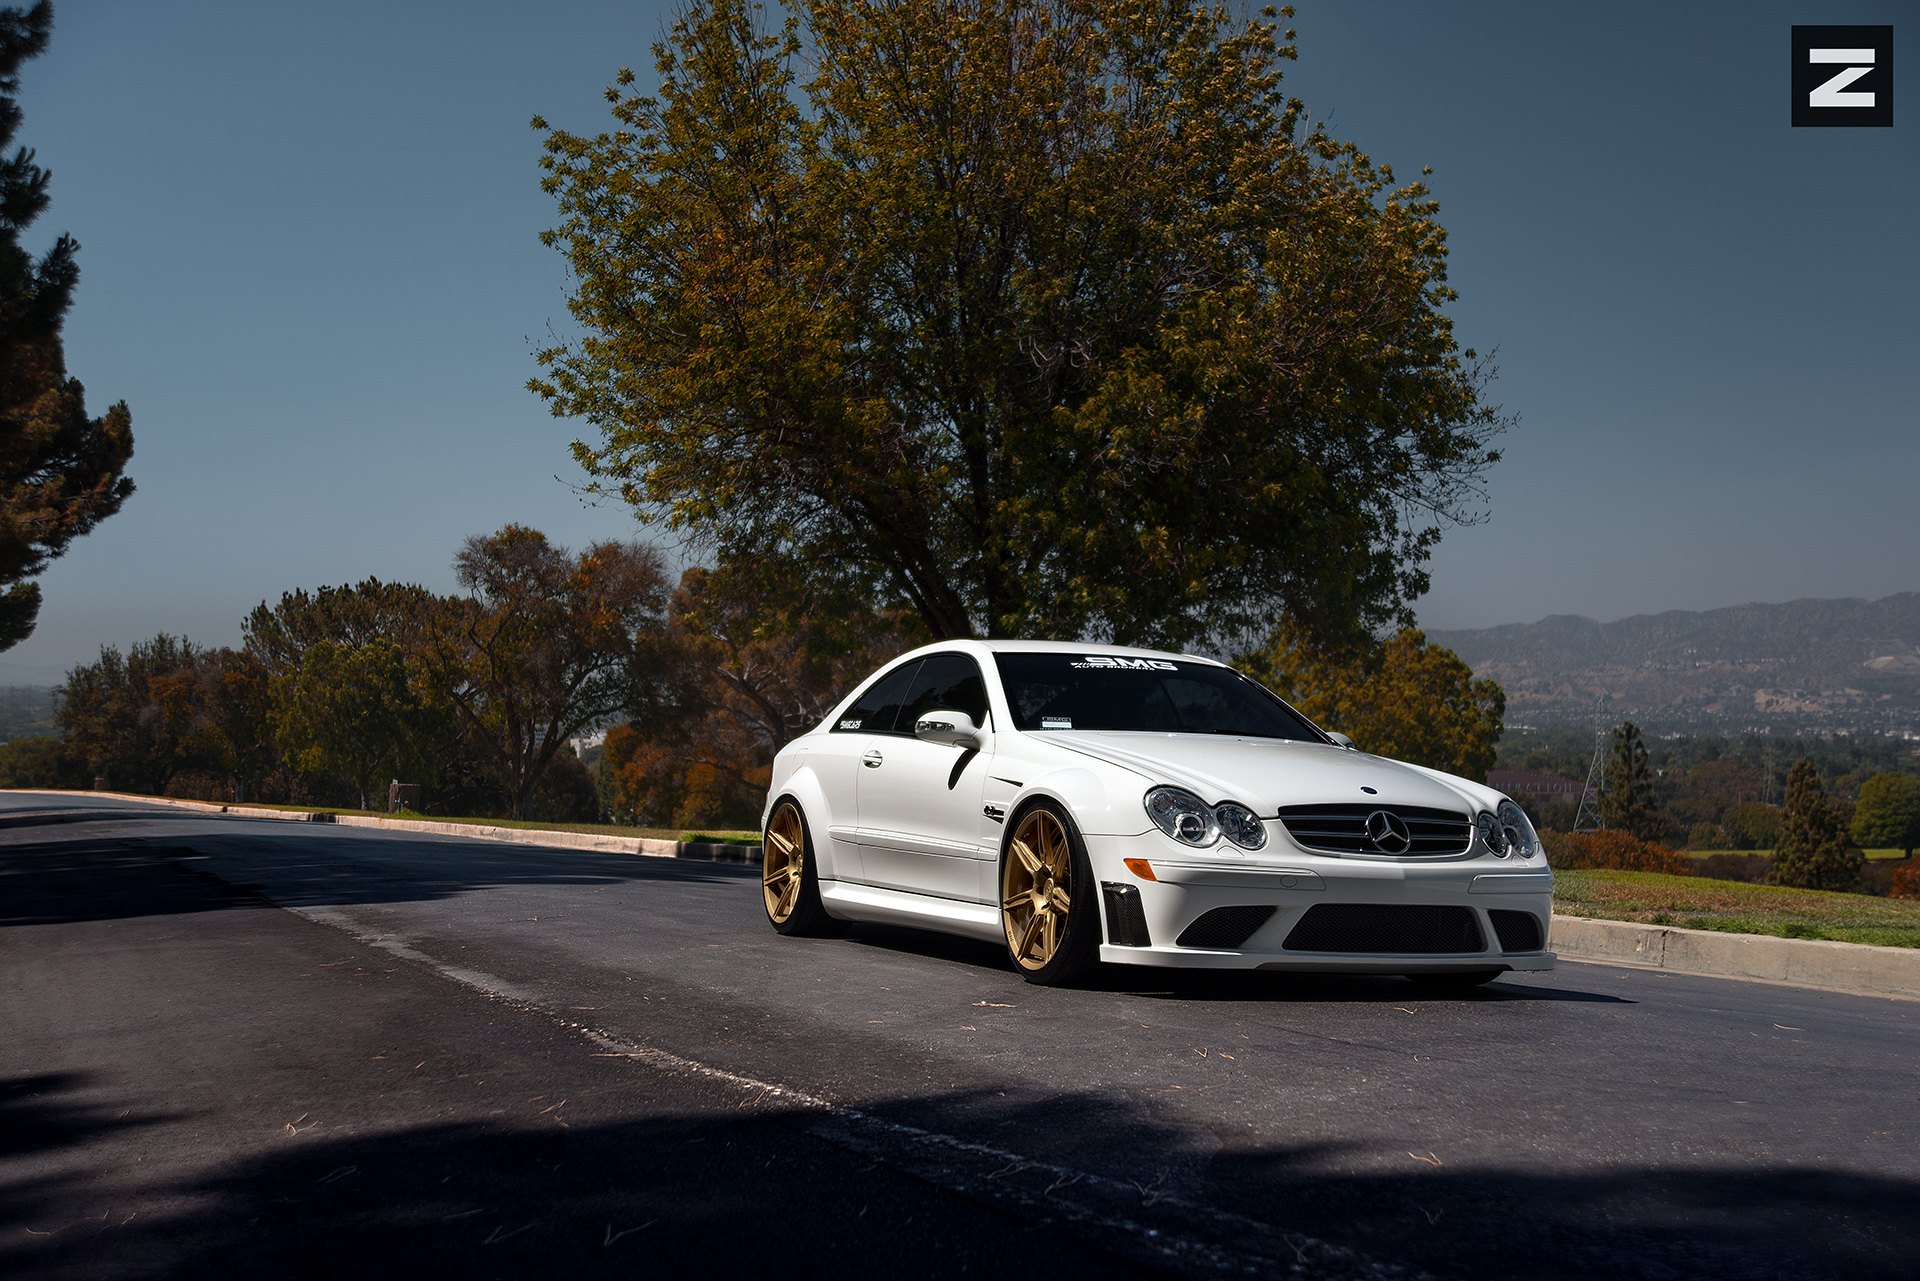 White Mercedes CLK Class with Matte Gold Zito Rims - Photo by Zito Wheels